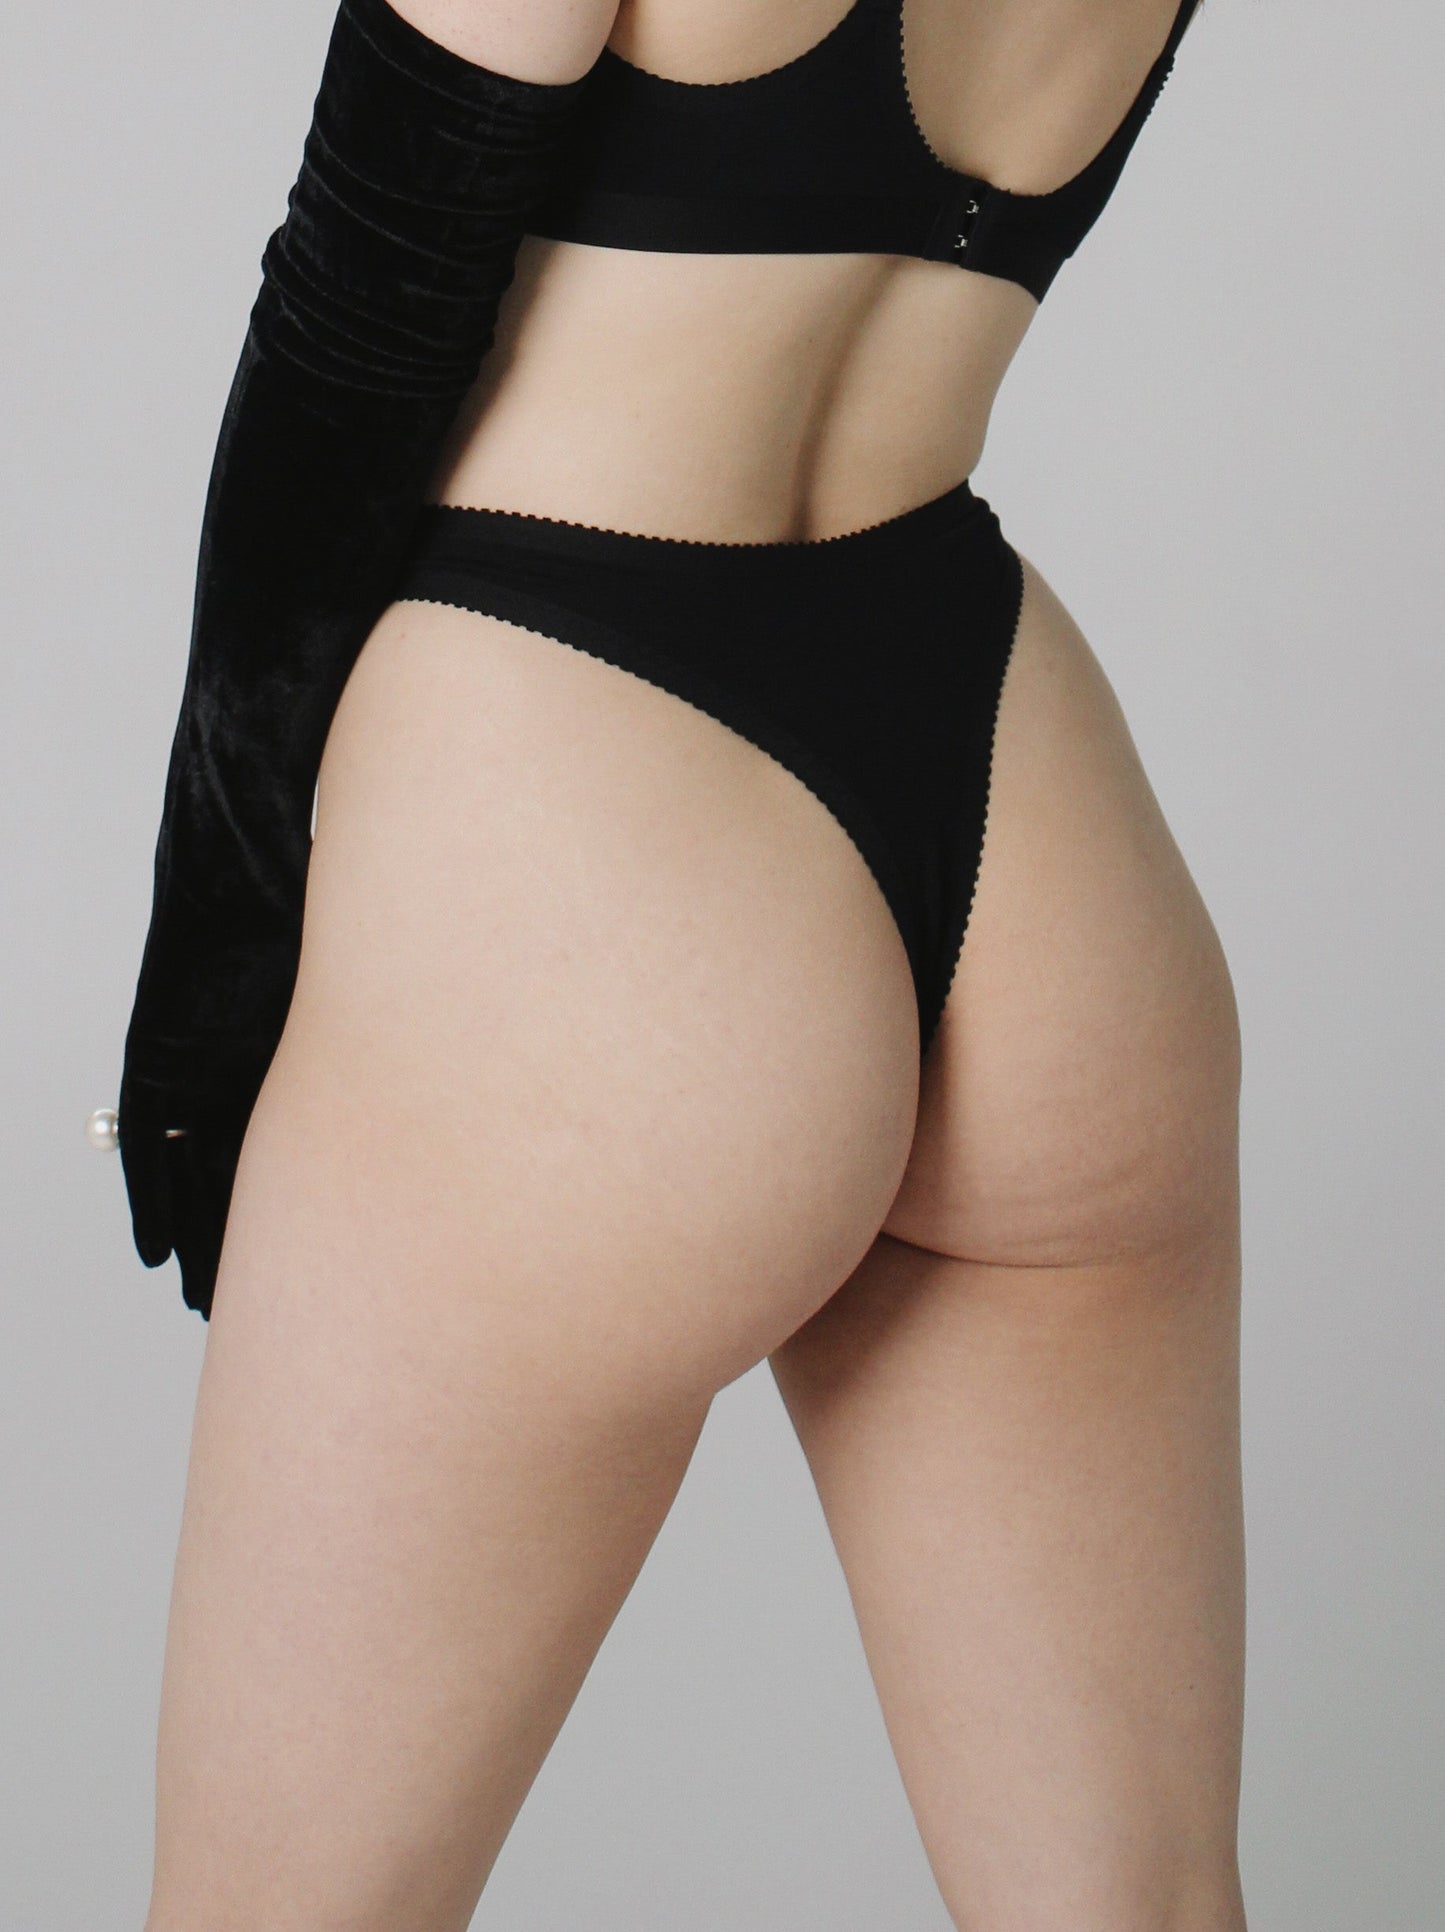 Black High Waisted Thong  Ethical Lingerie Made in Australia by